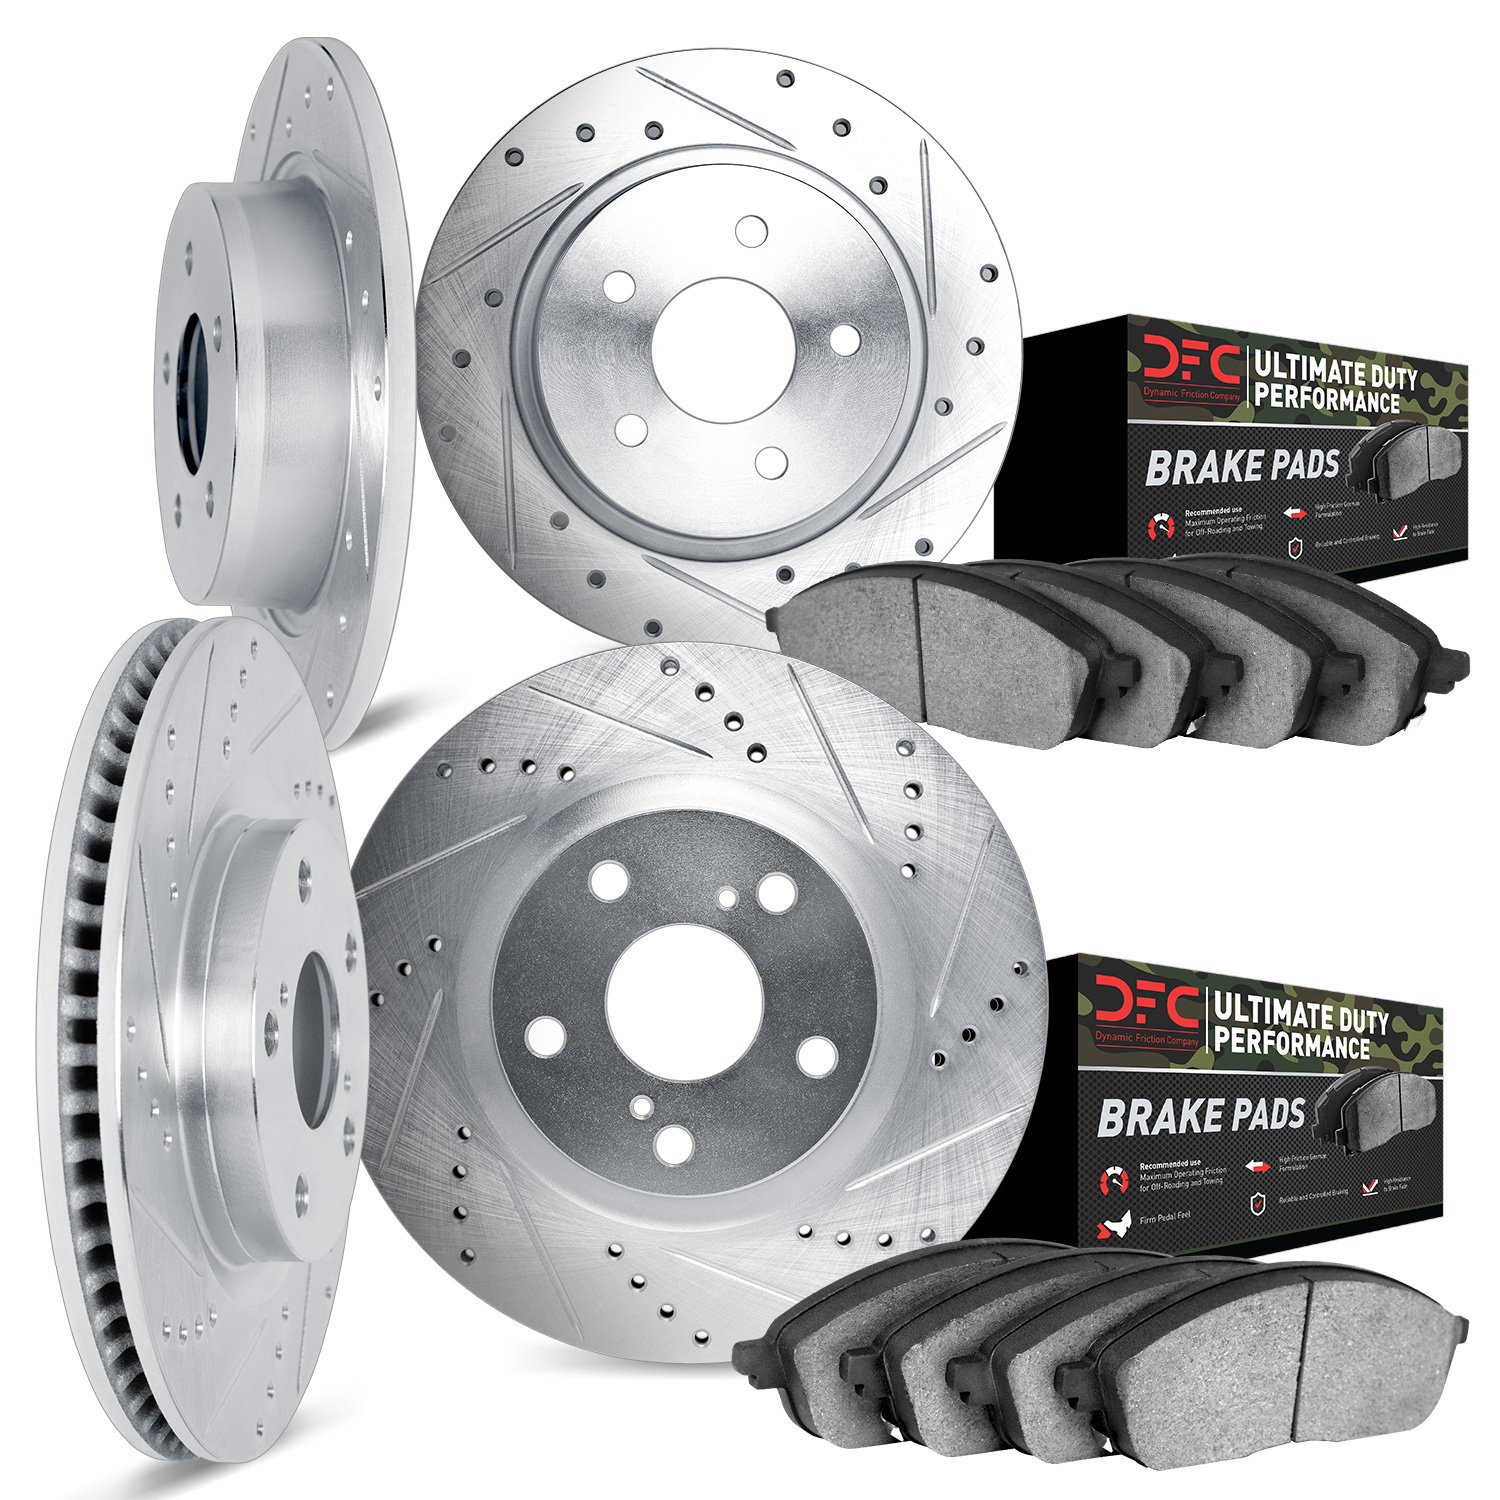 7404-54004 Drilled/Slotted Brake Rotors with Ultimate-Duty Brake Pads Kit [Silver], 1998-1999 Ford/Lincoln/Mercury/Mazda, Positi